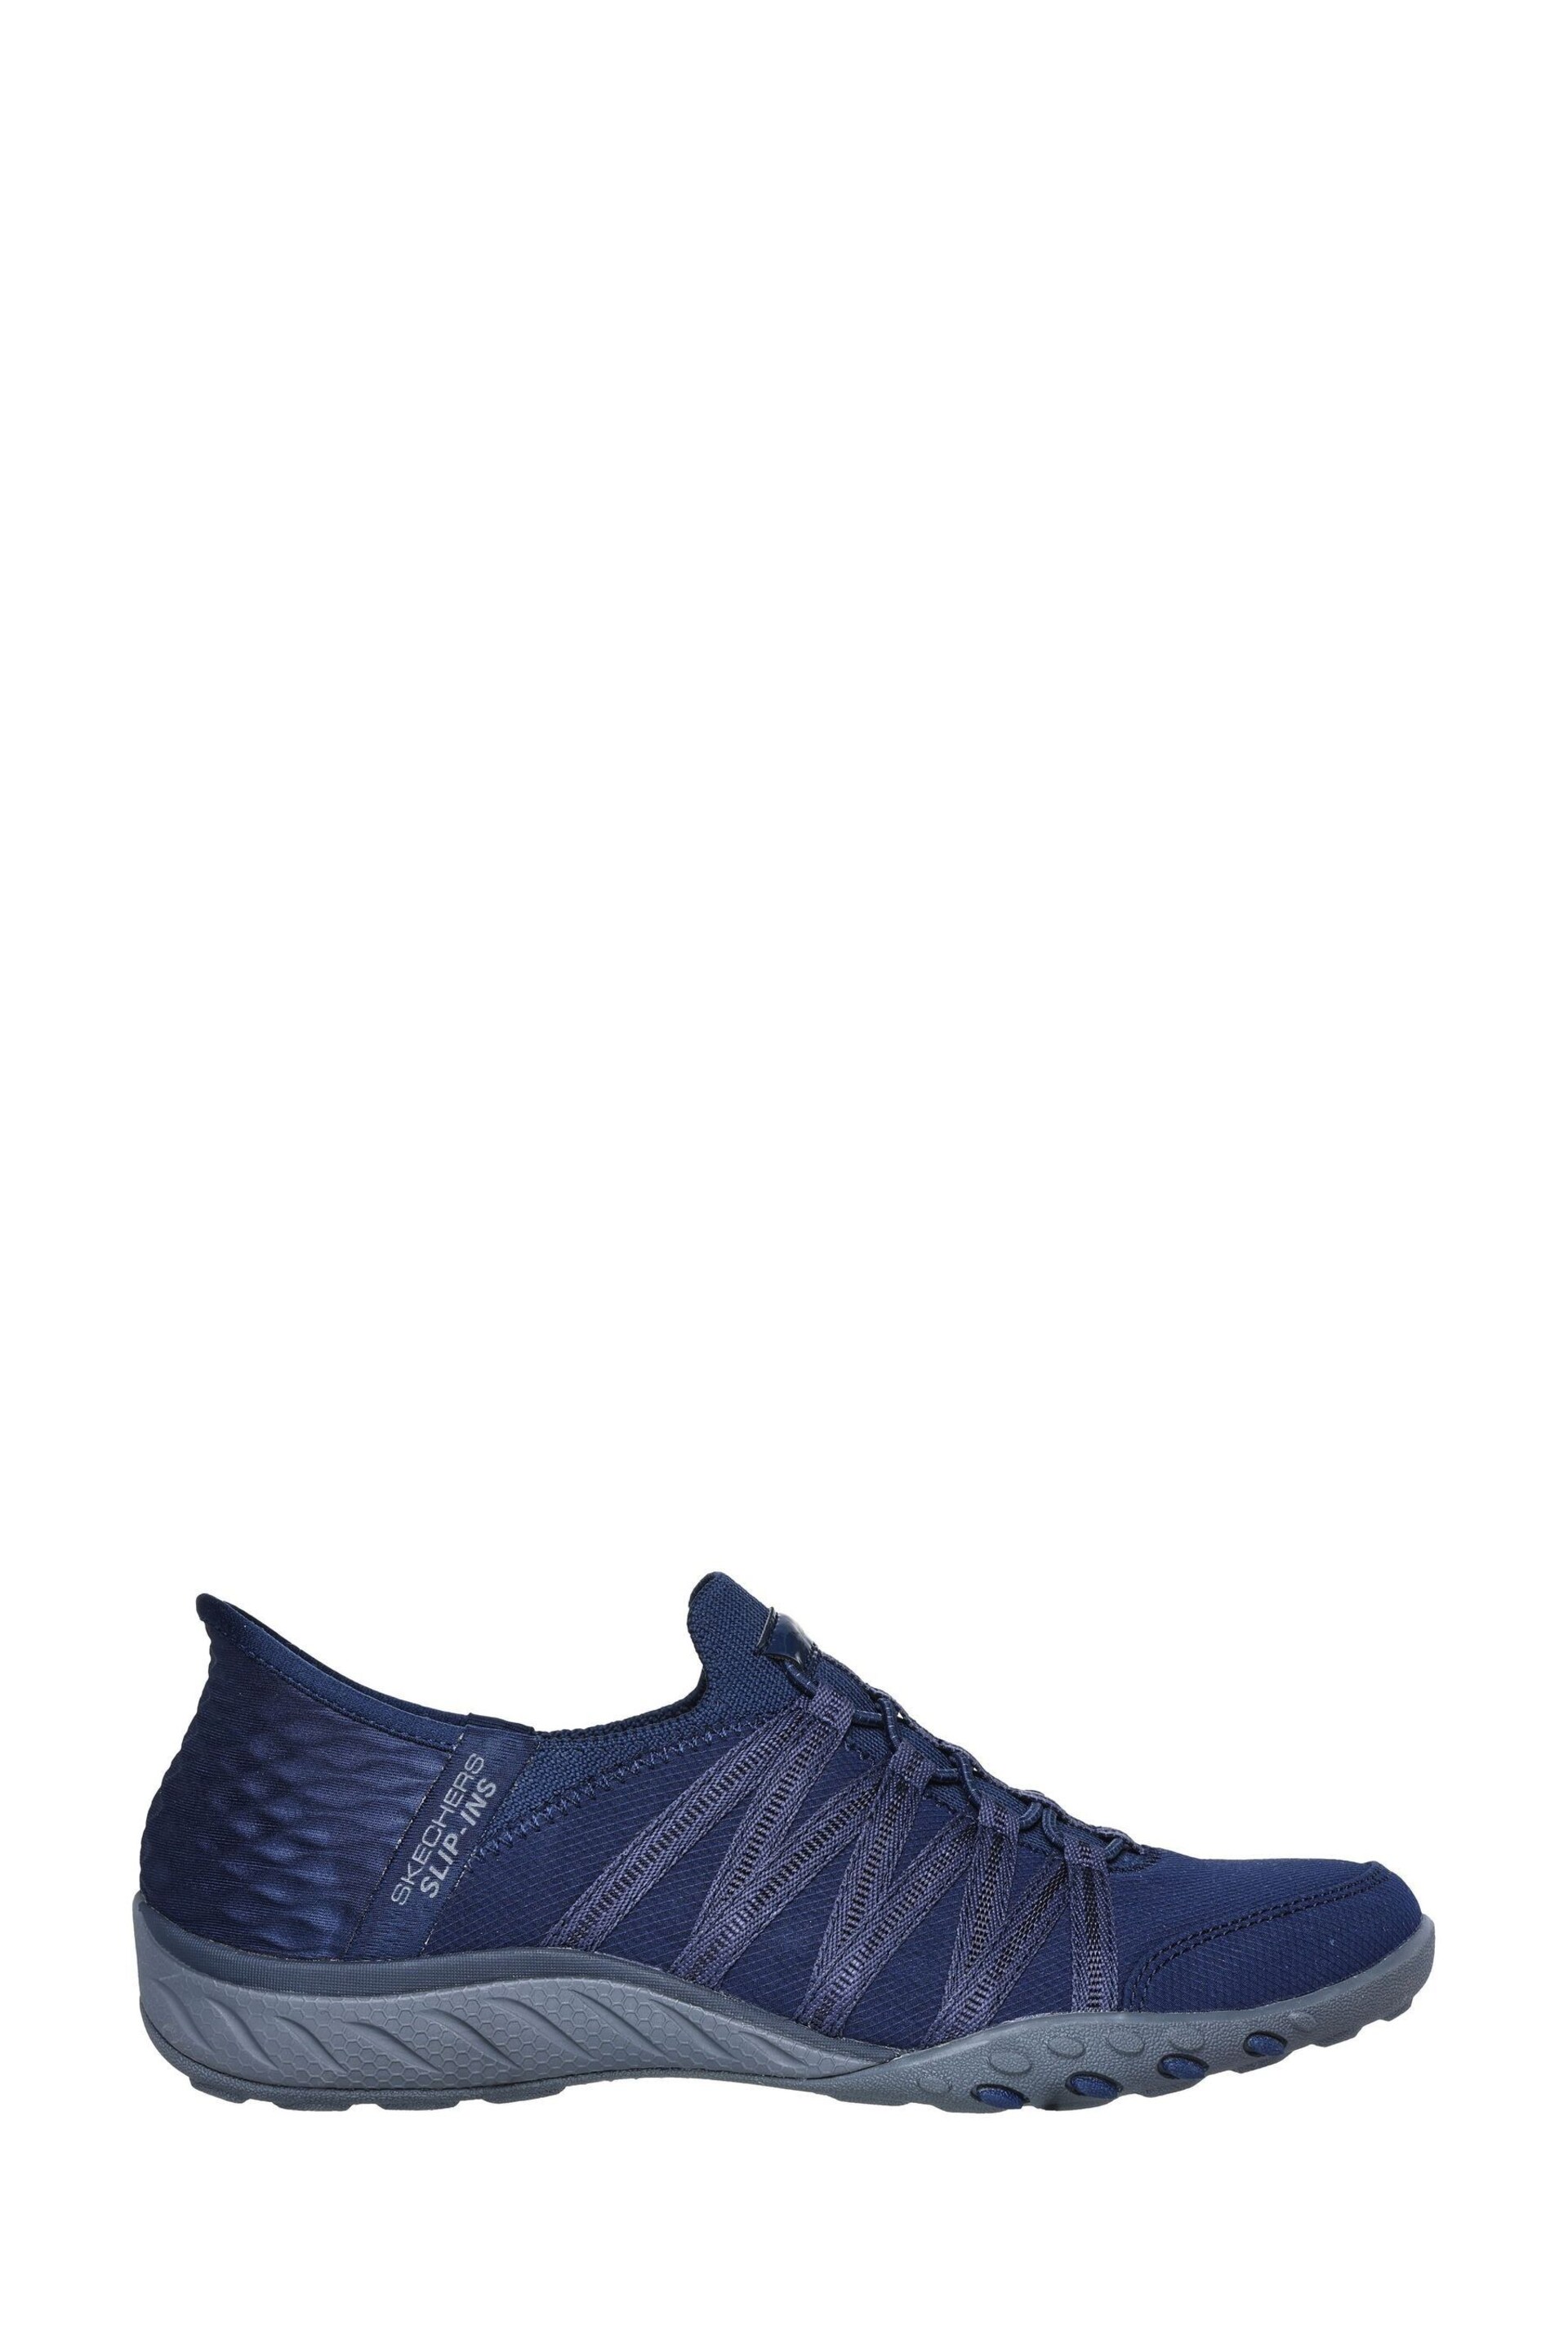 Skechers Blue Breathe Easy Roll With Me Trainers - Image 1 of 5